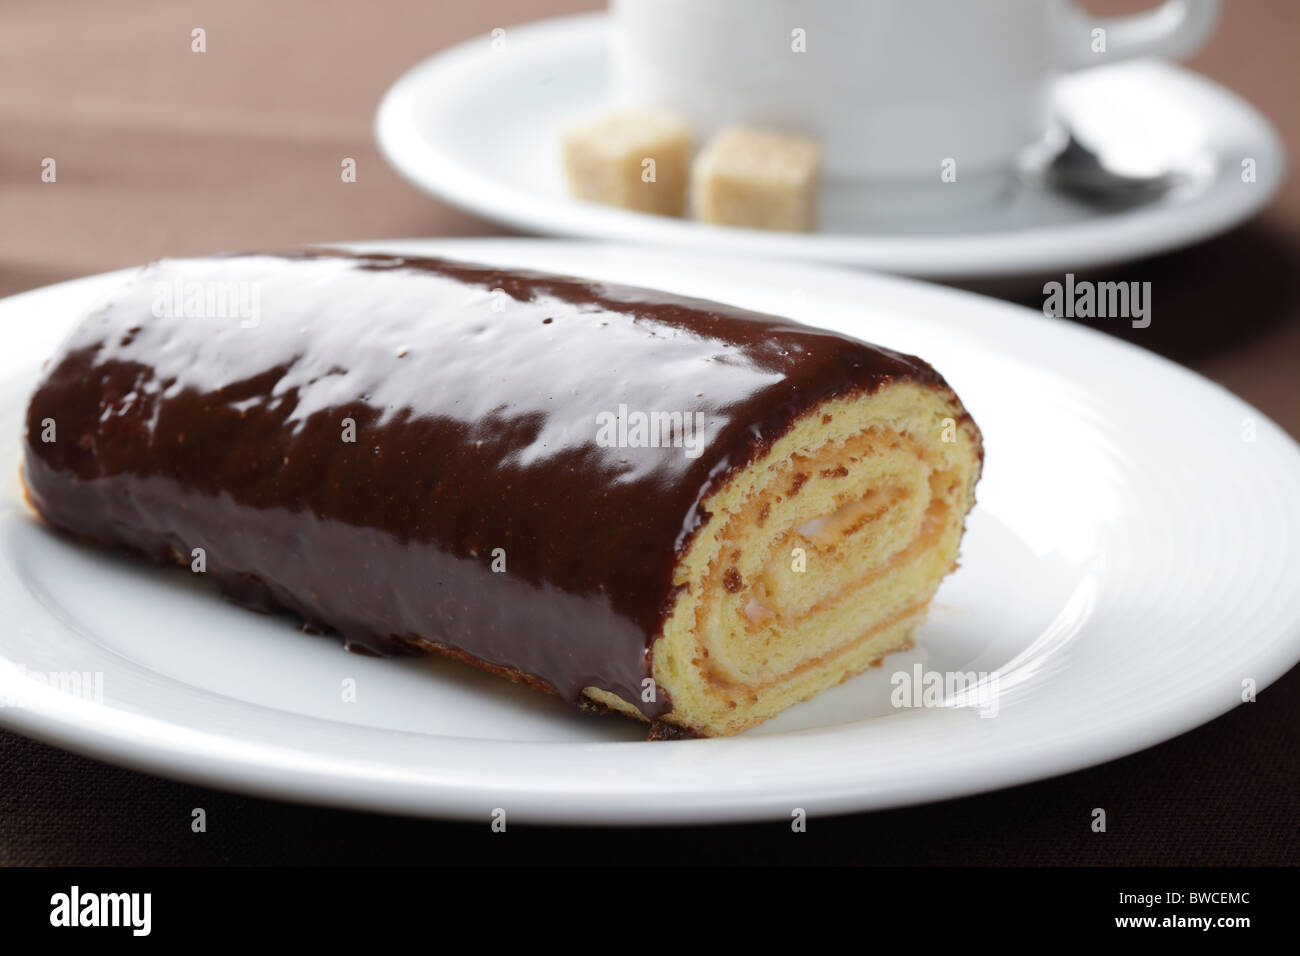 Swiss roll with cream filling and chocolate topping Stock Photo